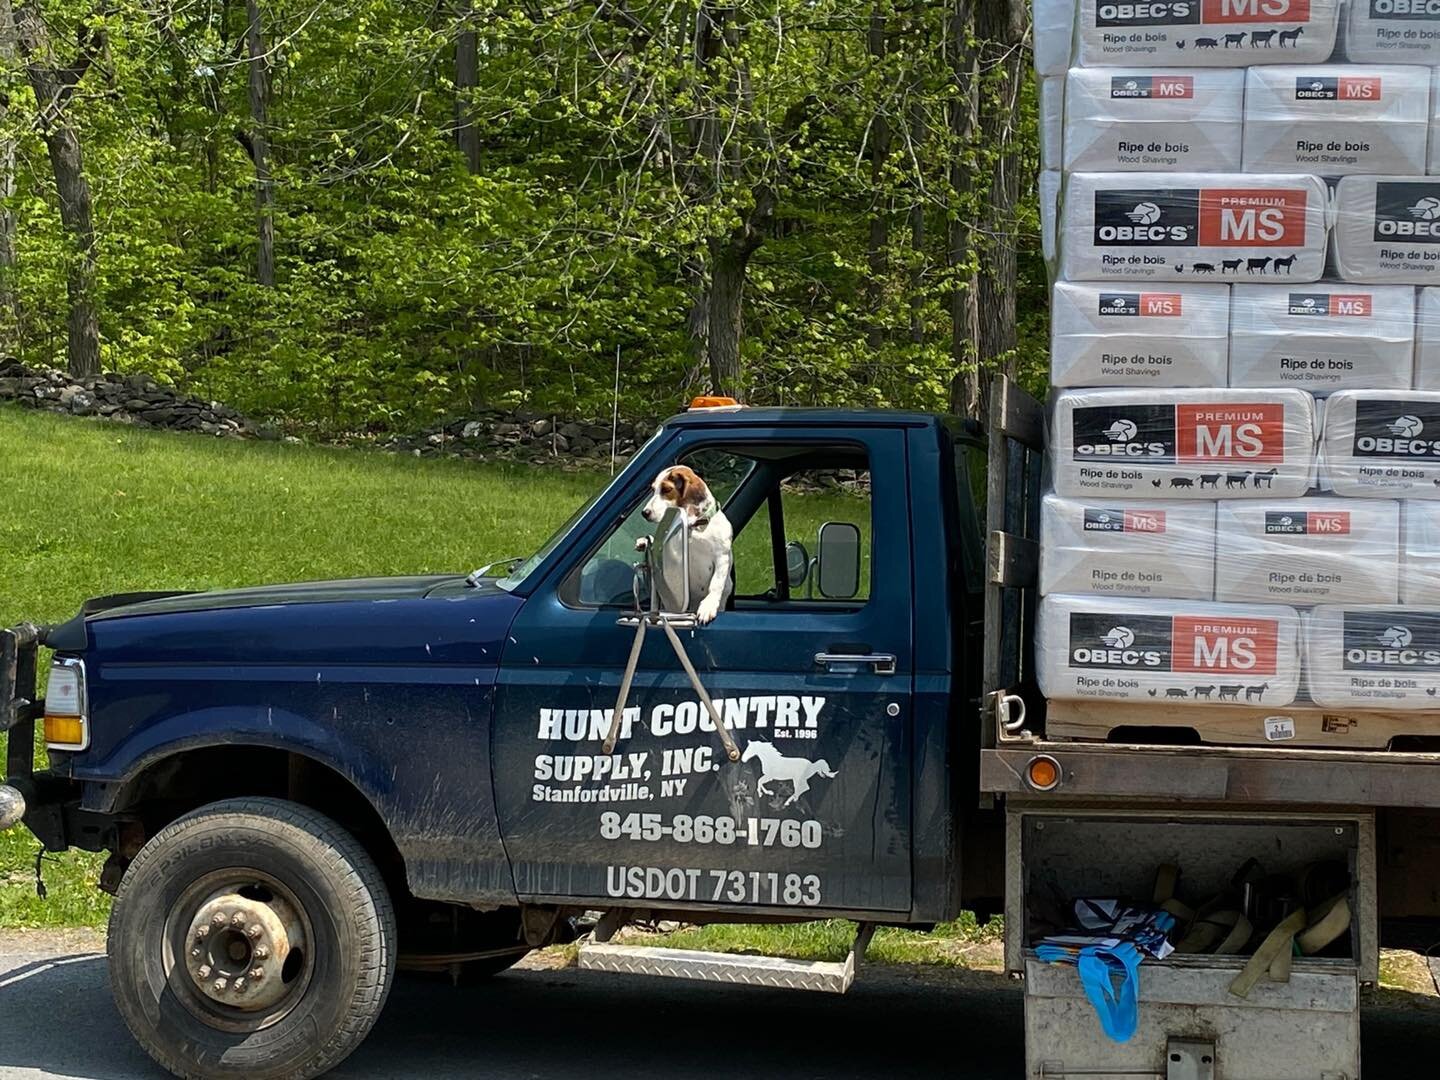 Thank you to Hunt Country Supply Inc for always meeting our shaving supply needs. We go through quite the number of shavings on a weekly basis. Plus, we love snuggling with their mascot.